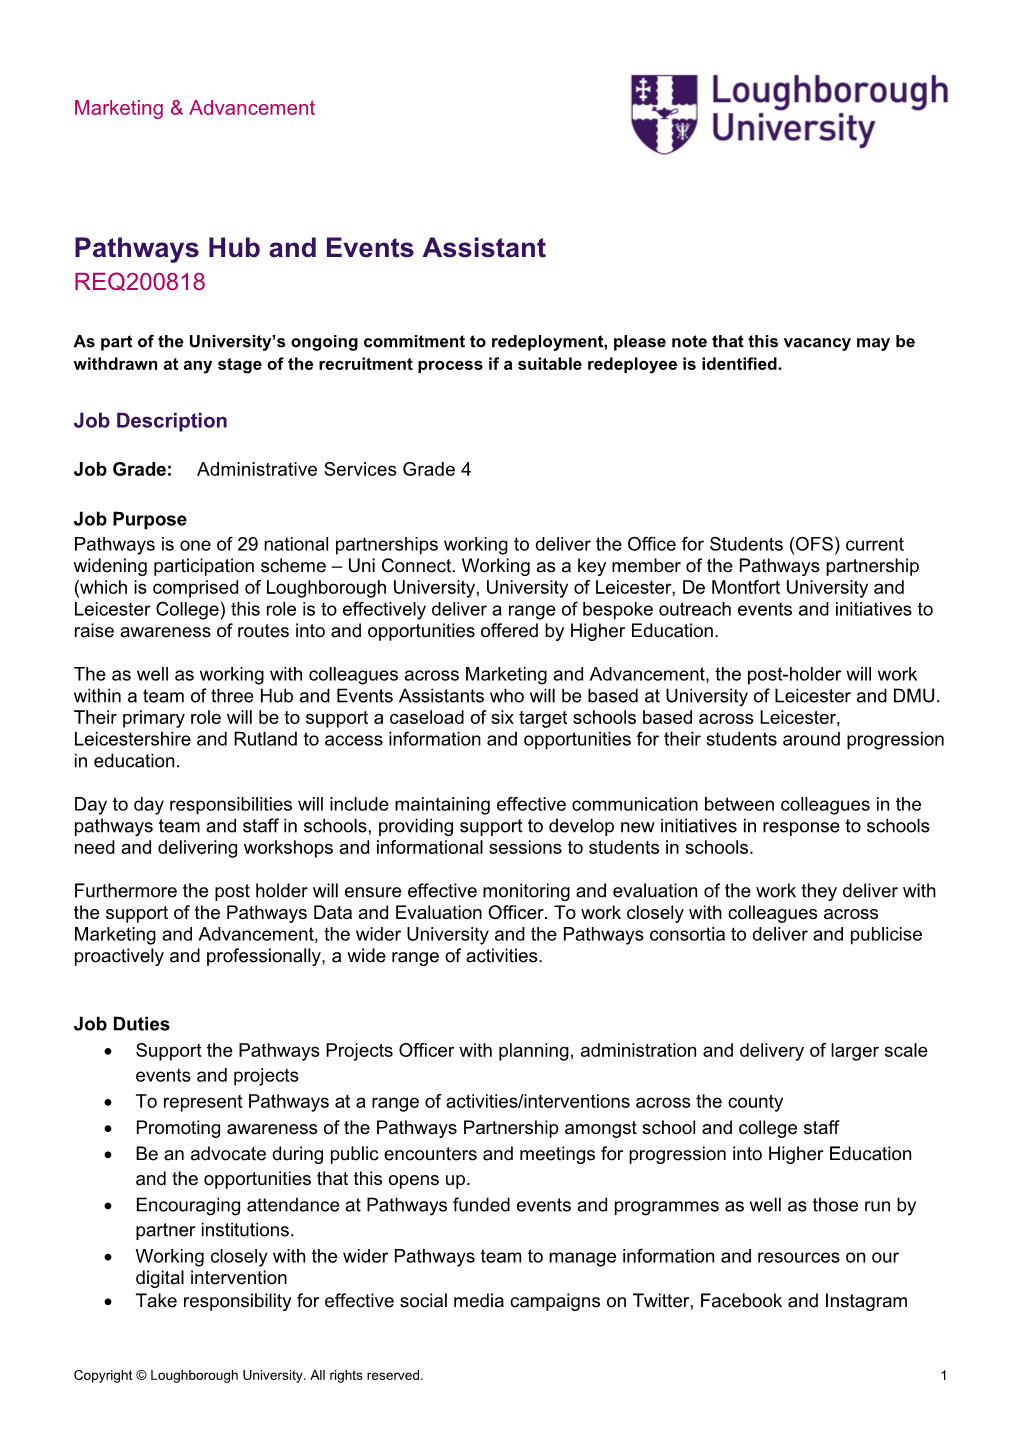 Pathways Hub and Events Assistant REQ200818